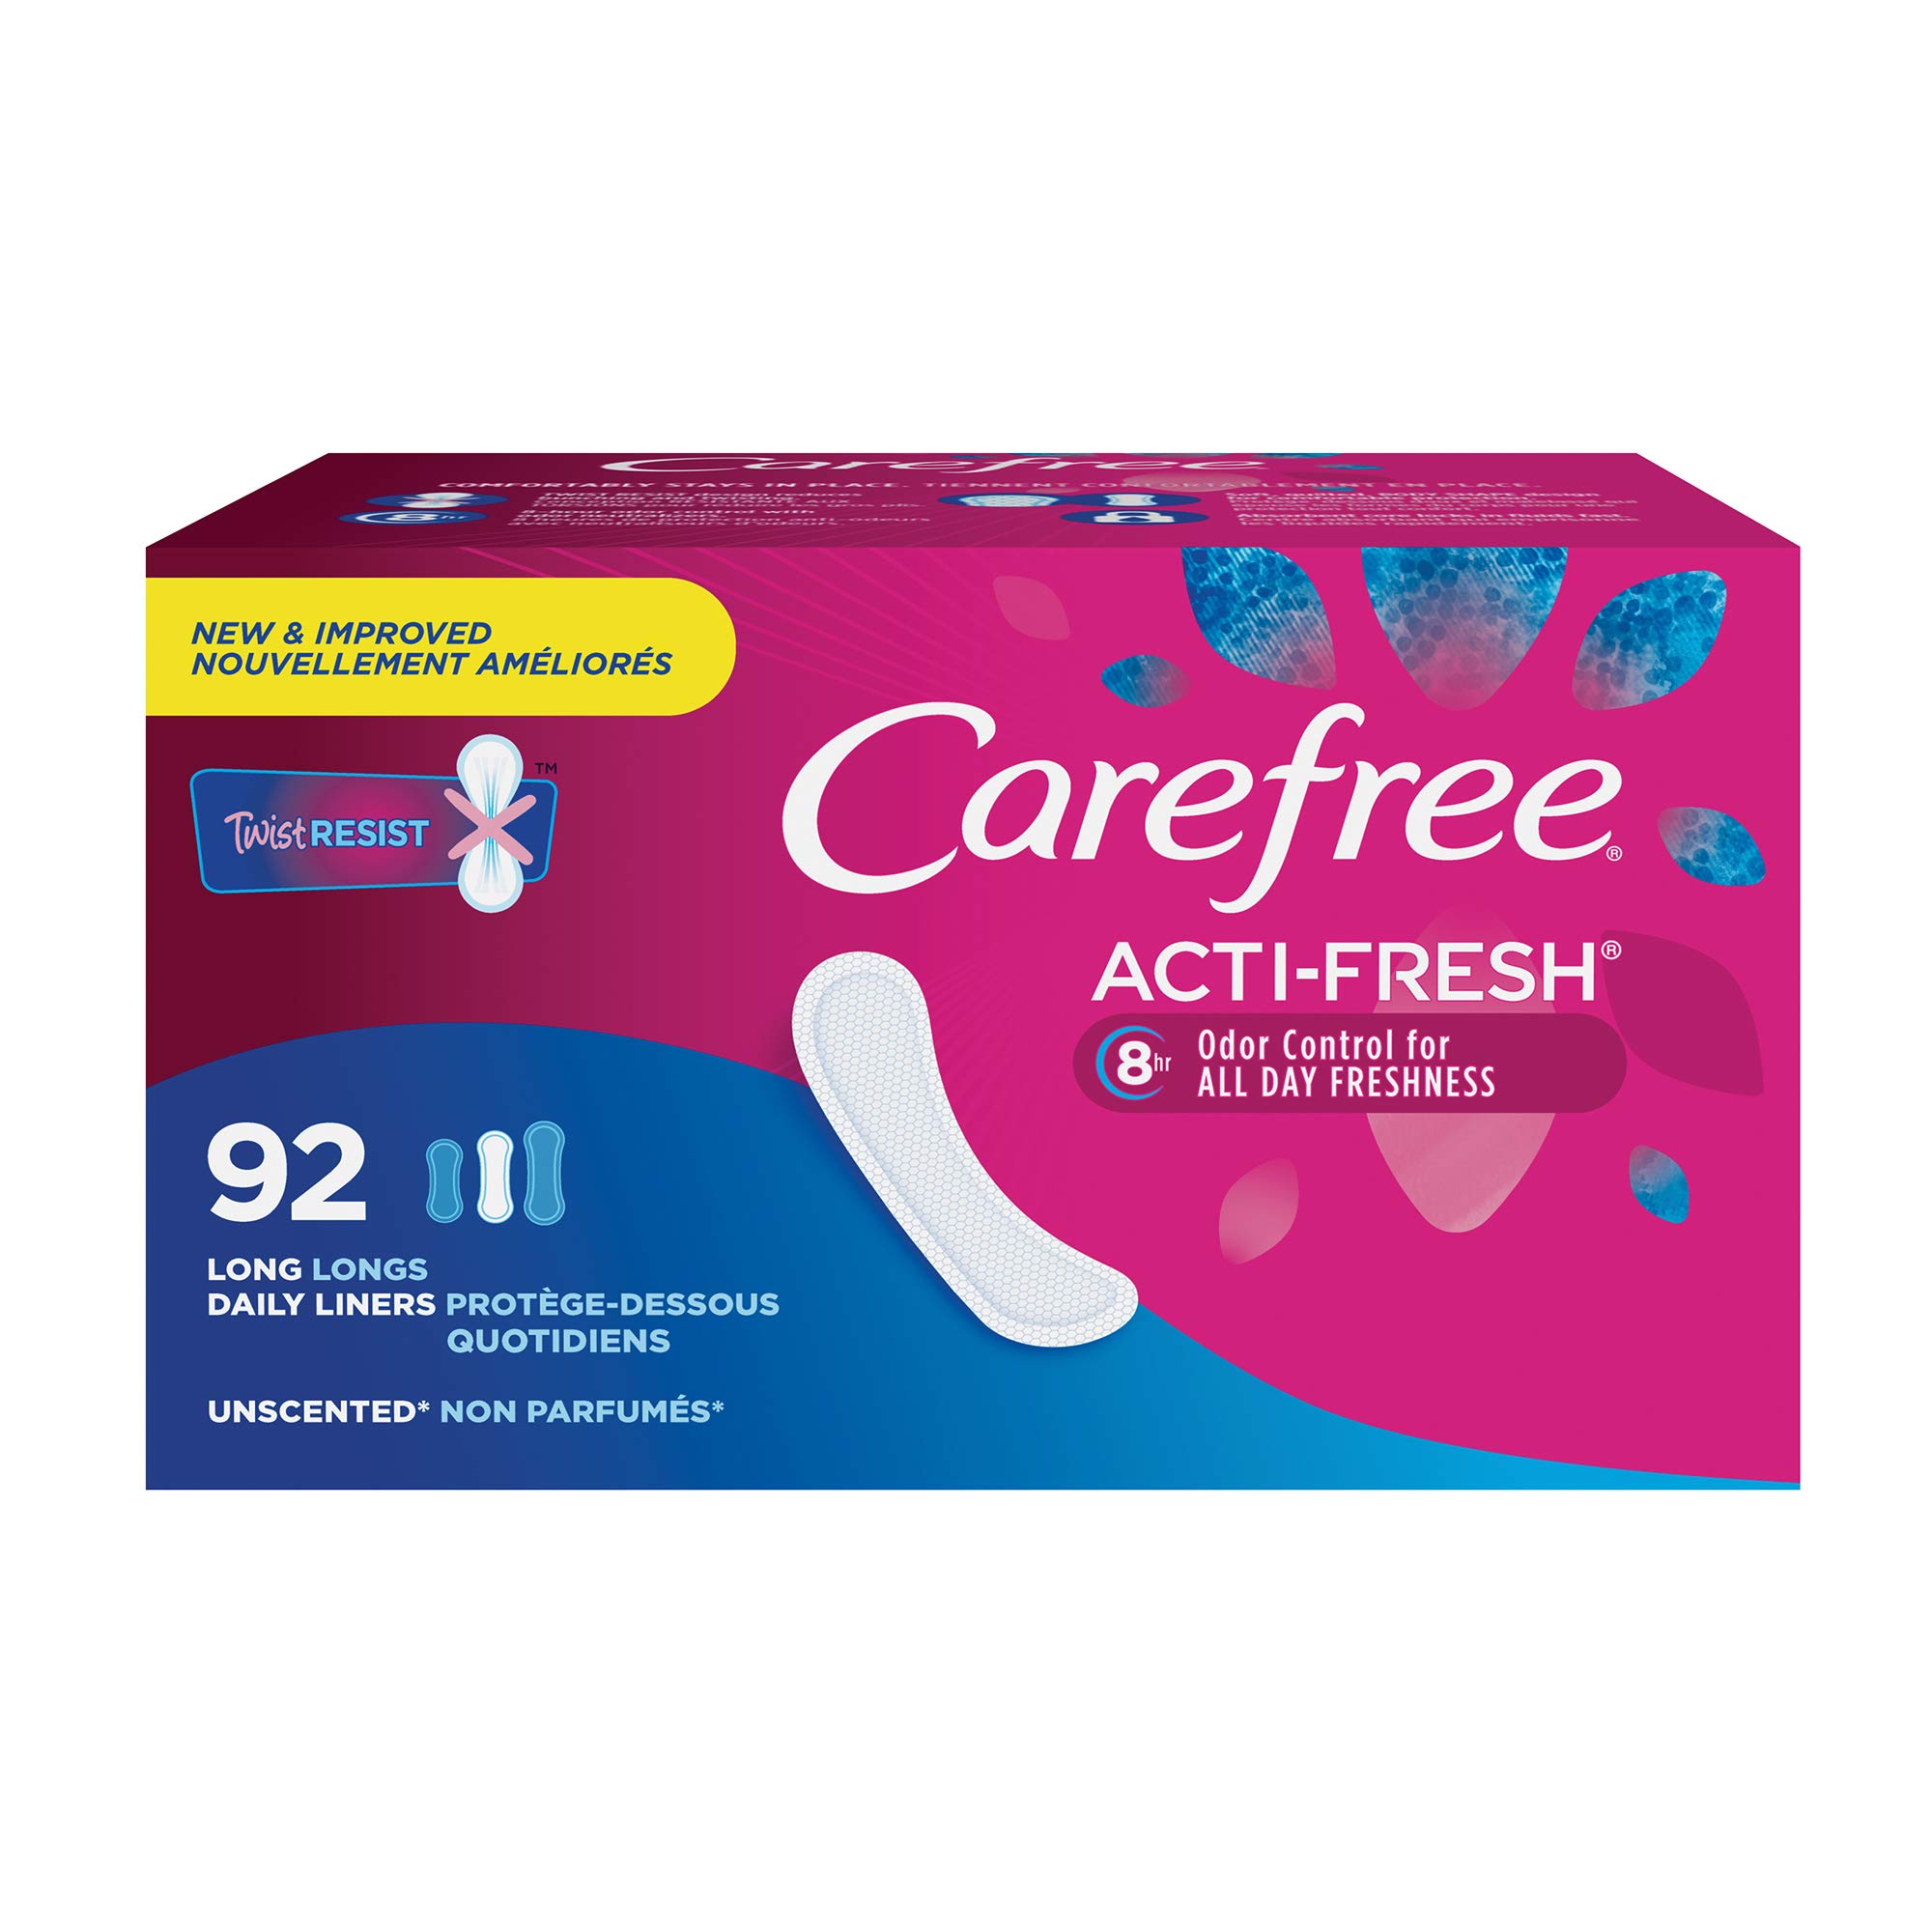 Carefree Acti-Fresh Thin Panty Liners, Unscented, 92 Count, Pack of 1  (Packaging May Vary)